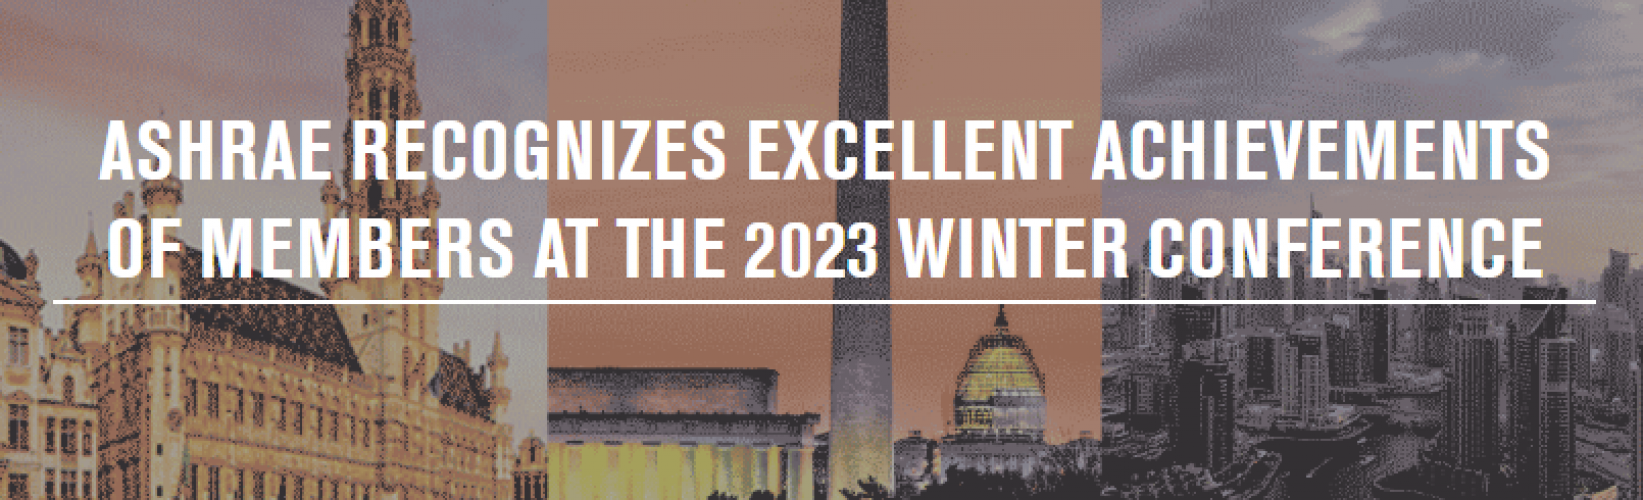 ASHRAE Recognizes Excellent Achievements of Members at the 2023 Winter Conference